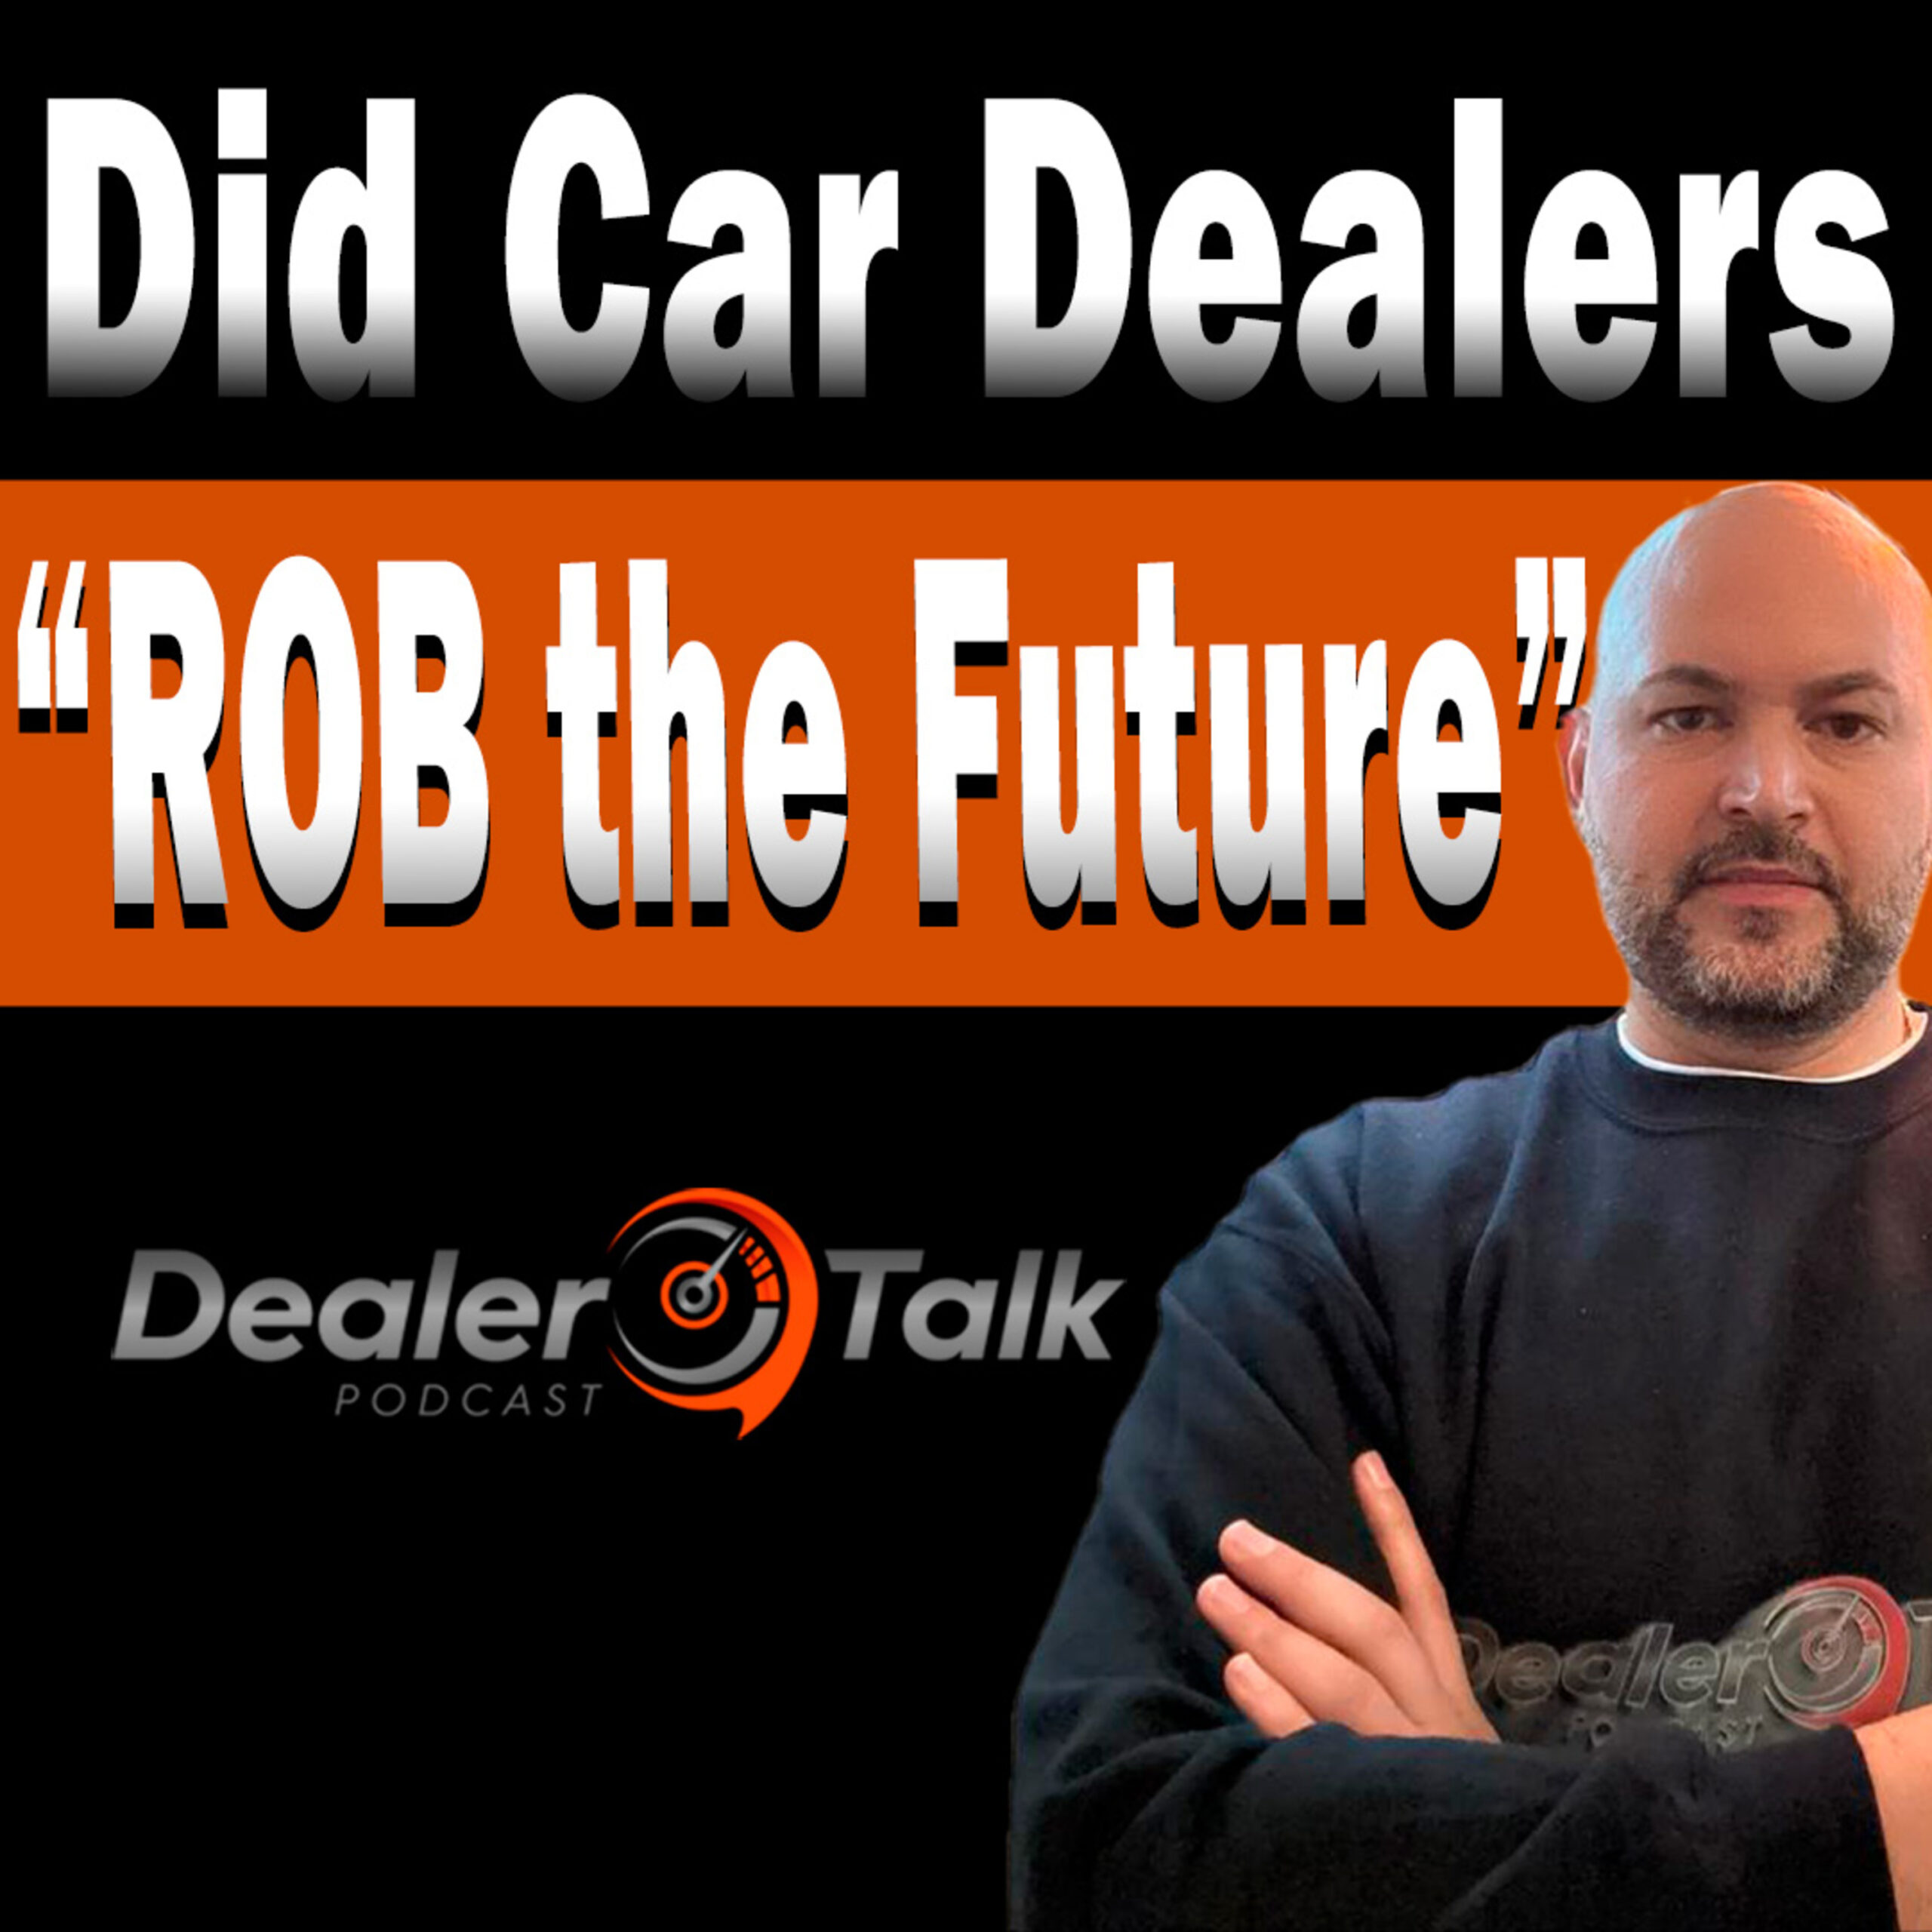 You are currently viewing Jim “Alpha Dawg” Ziegler: Did Car Dealers Rob the Future?